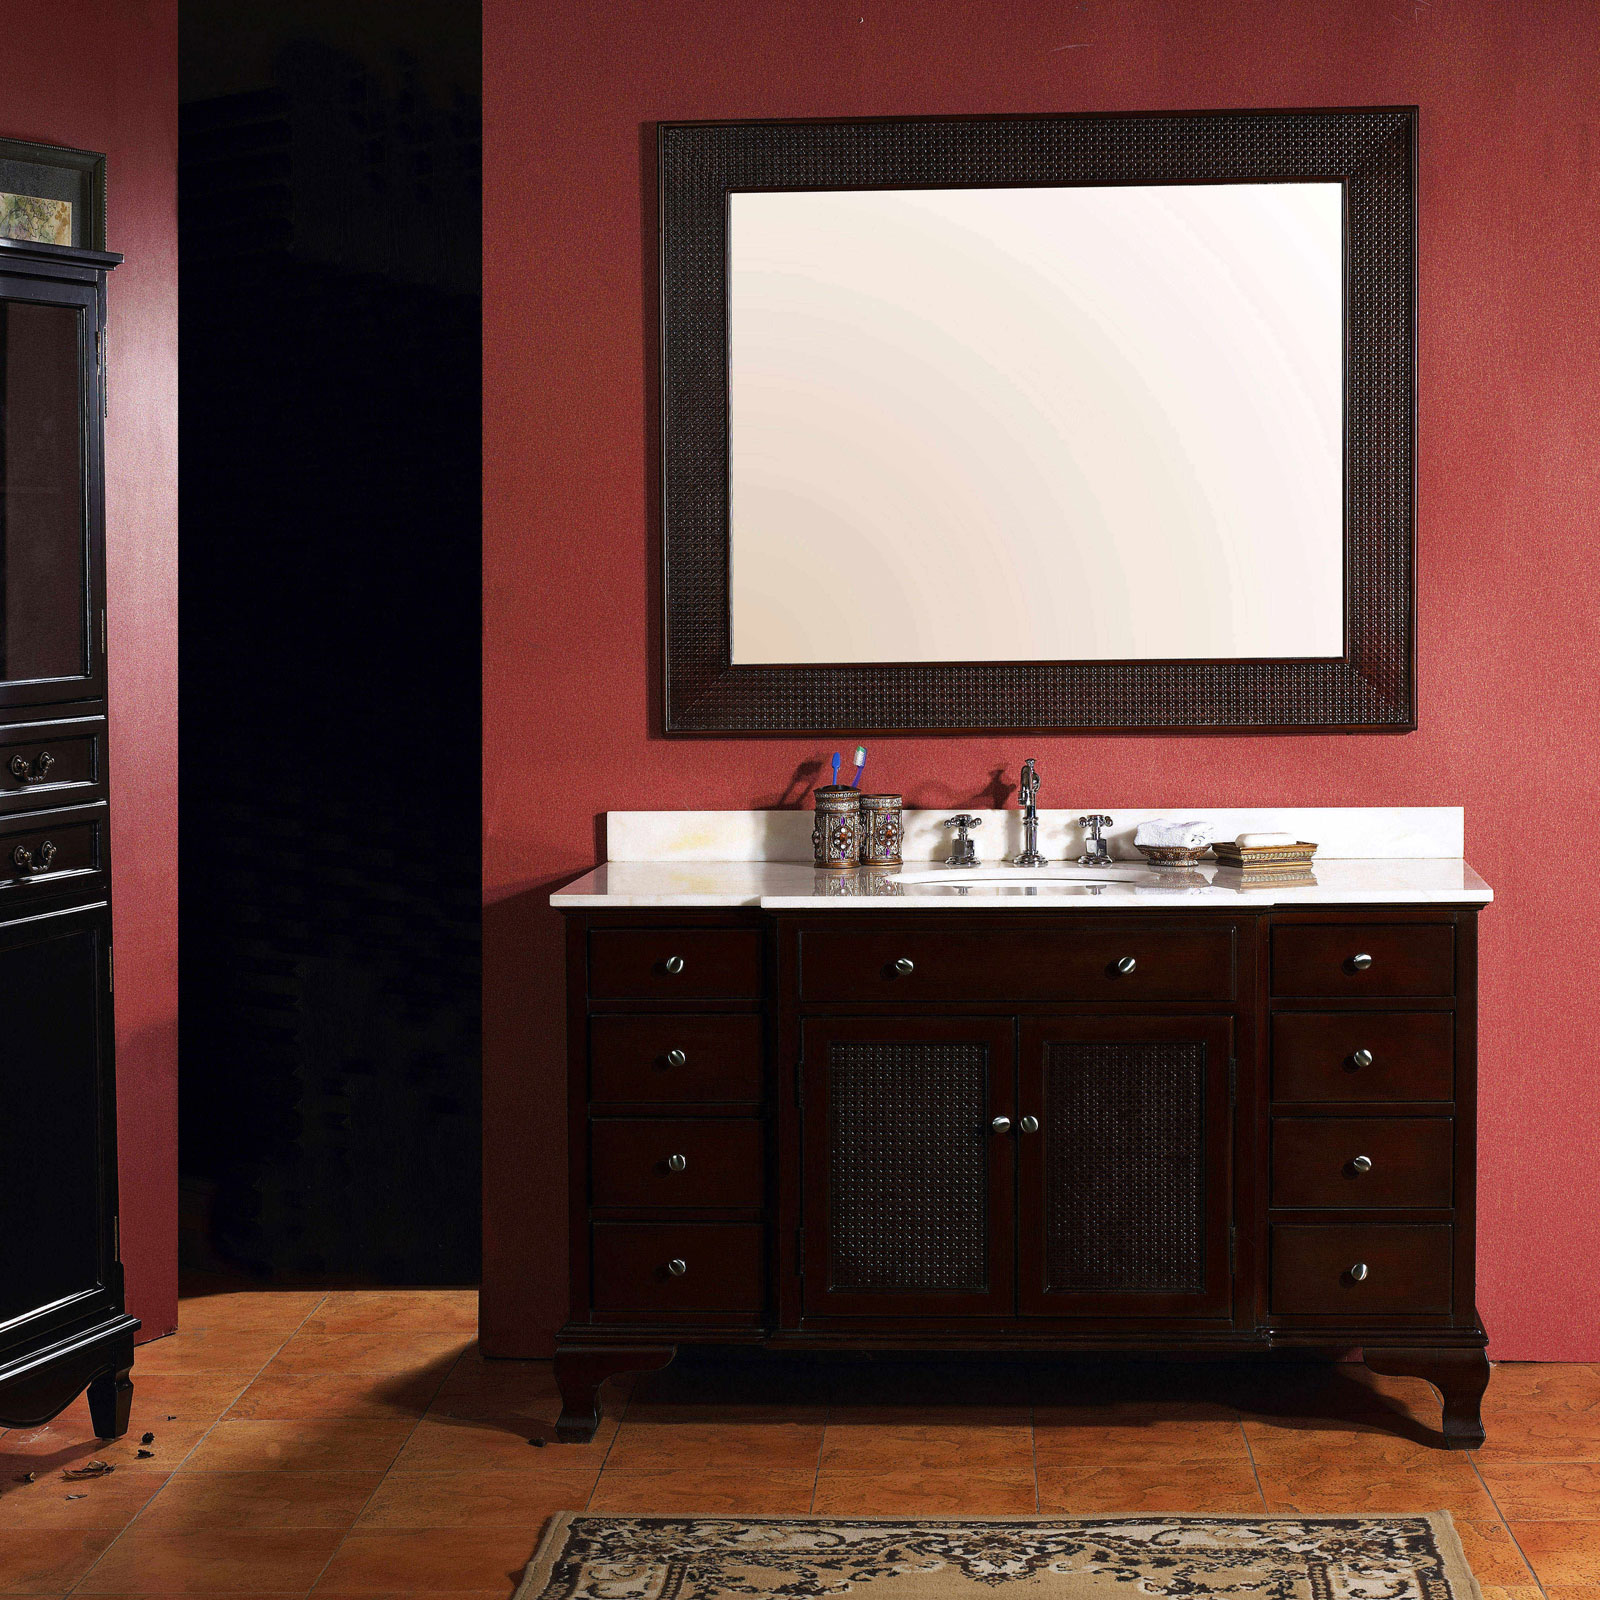 Contemporary Bathroom Brown Extraordinary Contemporary Bathroom With Dark Brown Color Of Bathroom Vanity Cabinets Coupled By White Sink And Large Mirror And Furnished With Bathroom Fixtures Bathroom 15 Bathroom Vanity Cabinets For Your Captivating Home